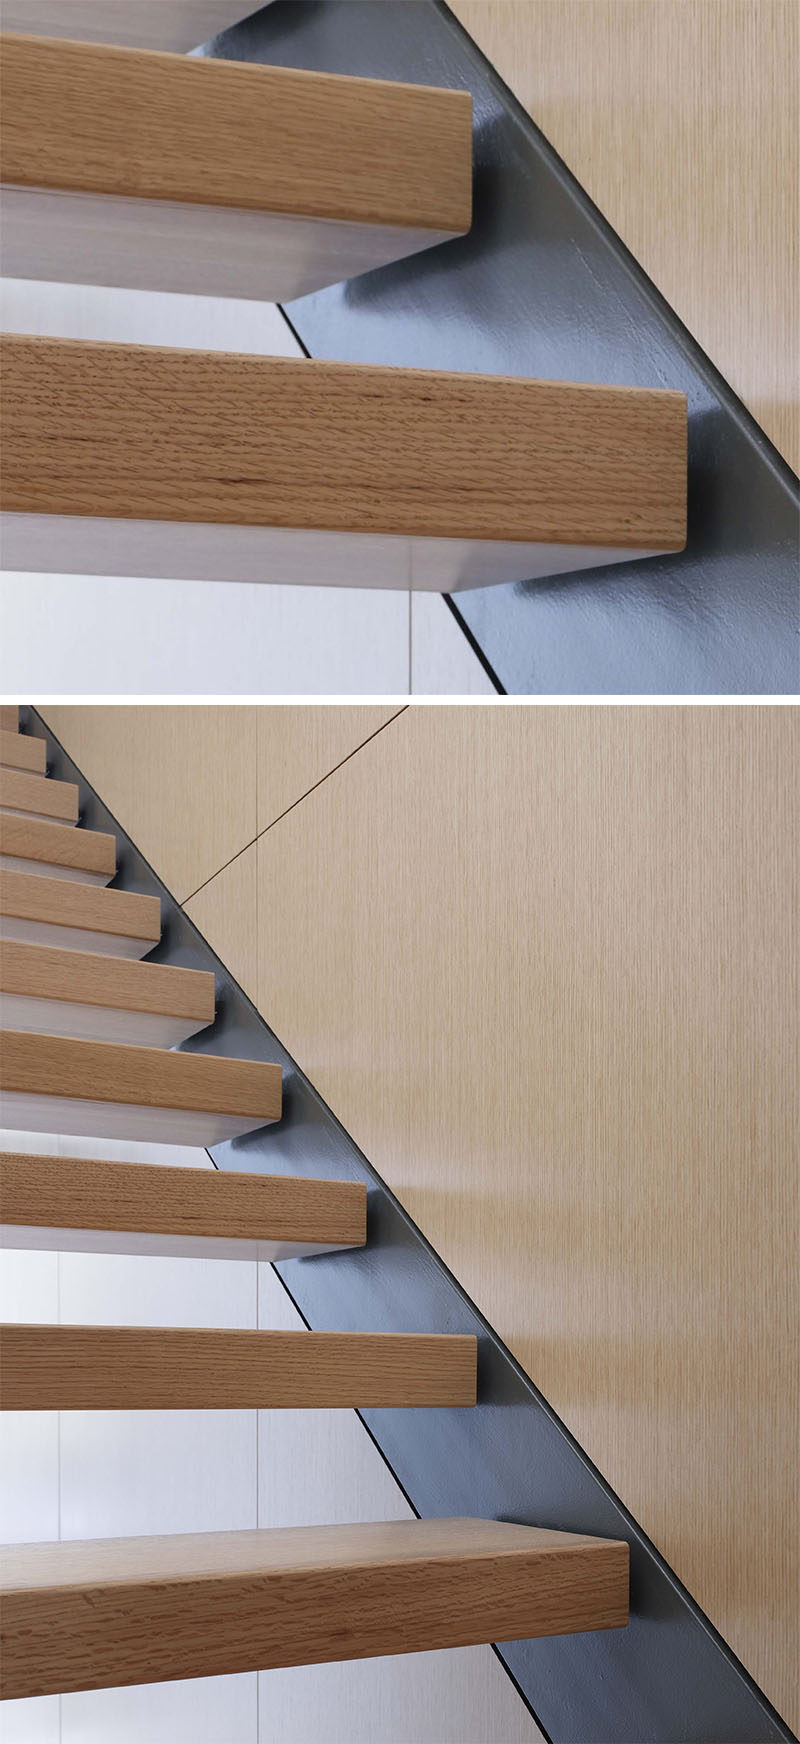 18 Examples Of Stair Details To Inspire You // The wooden steps are attached to steel beams that carry the stairs all the way up.